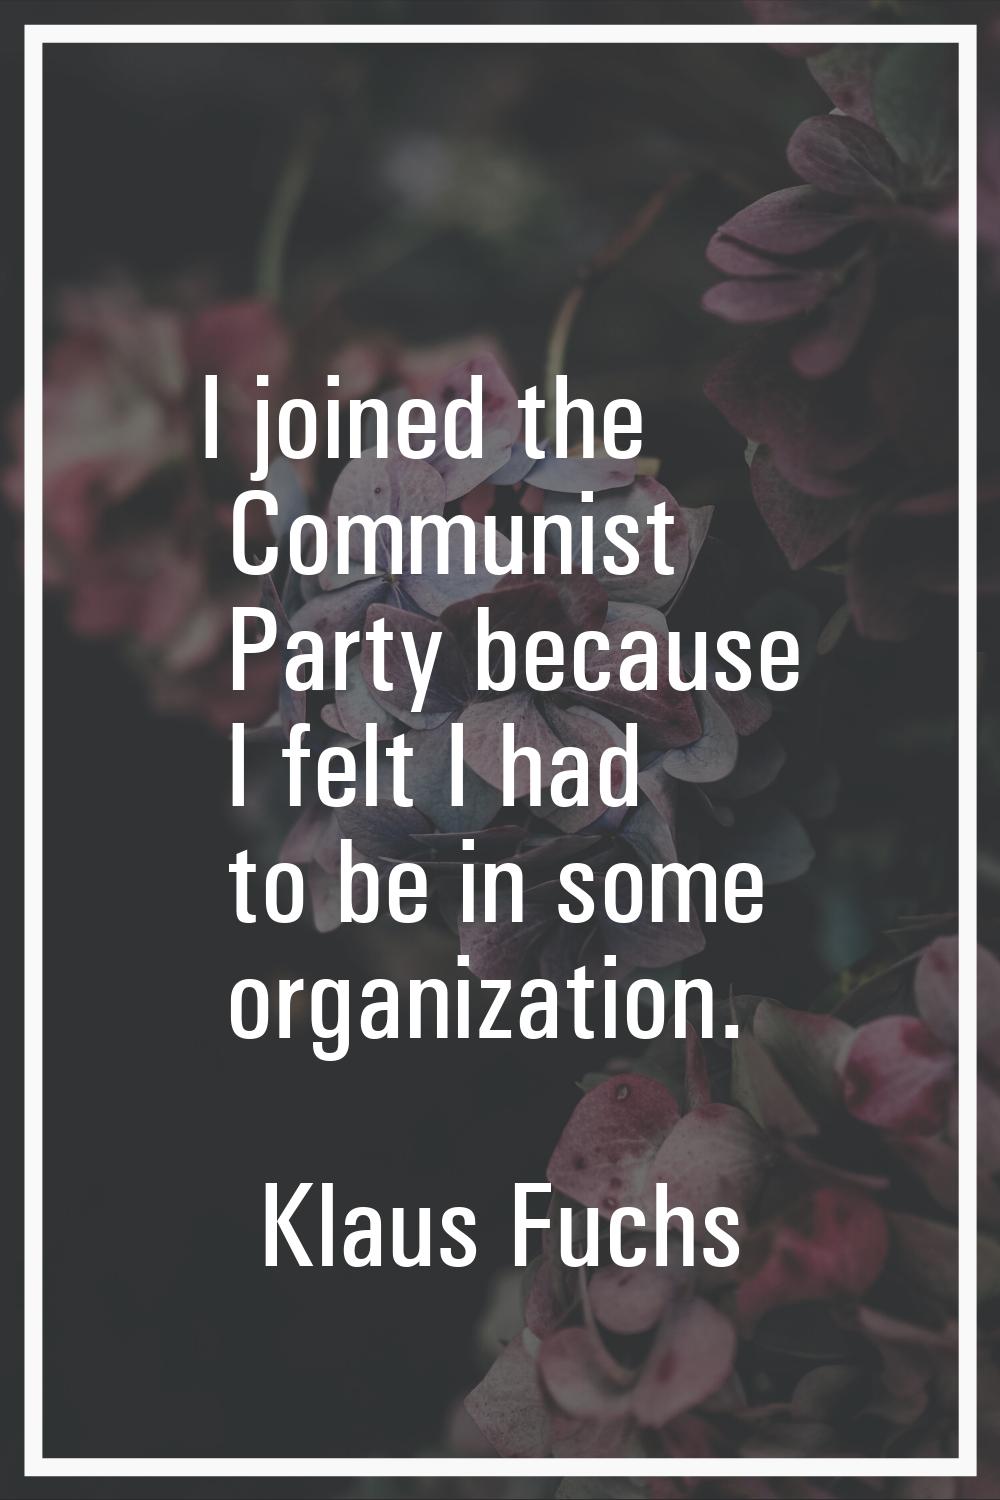 I joined the Communist Party because I felt I had to be in some organization.